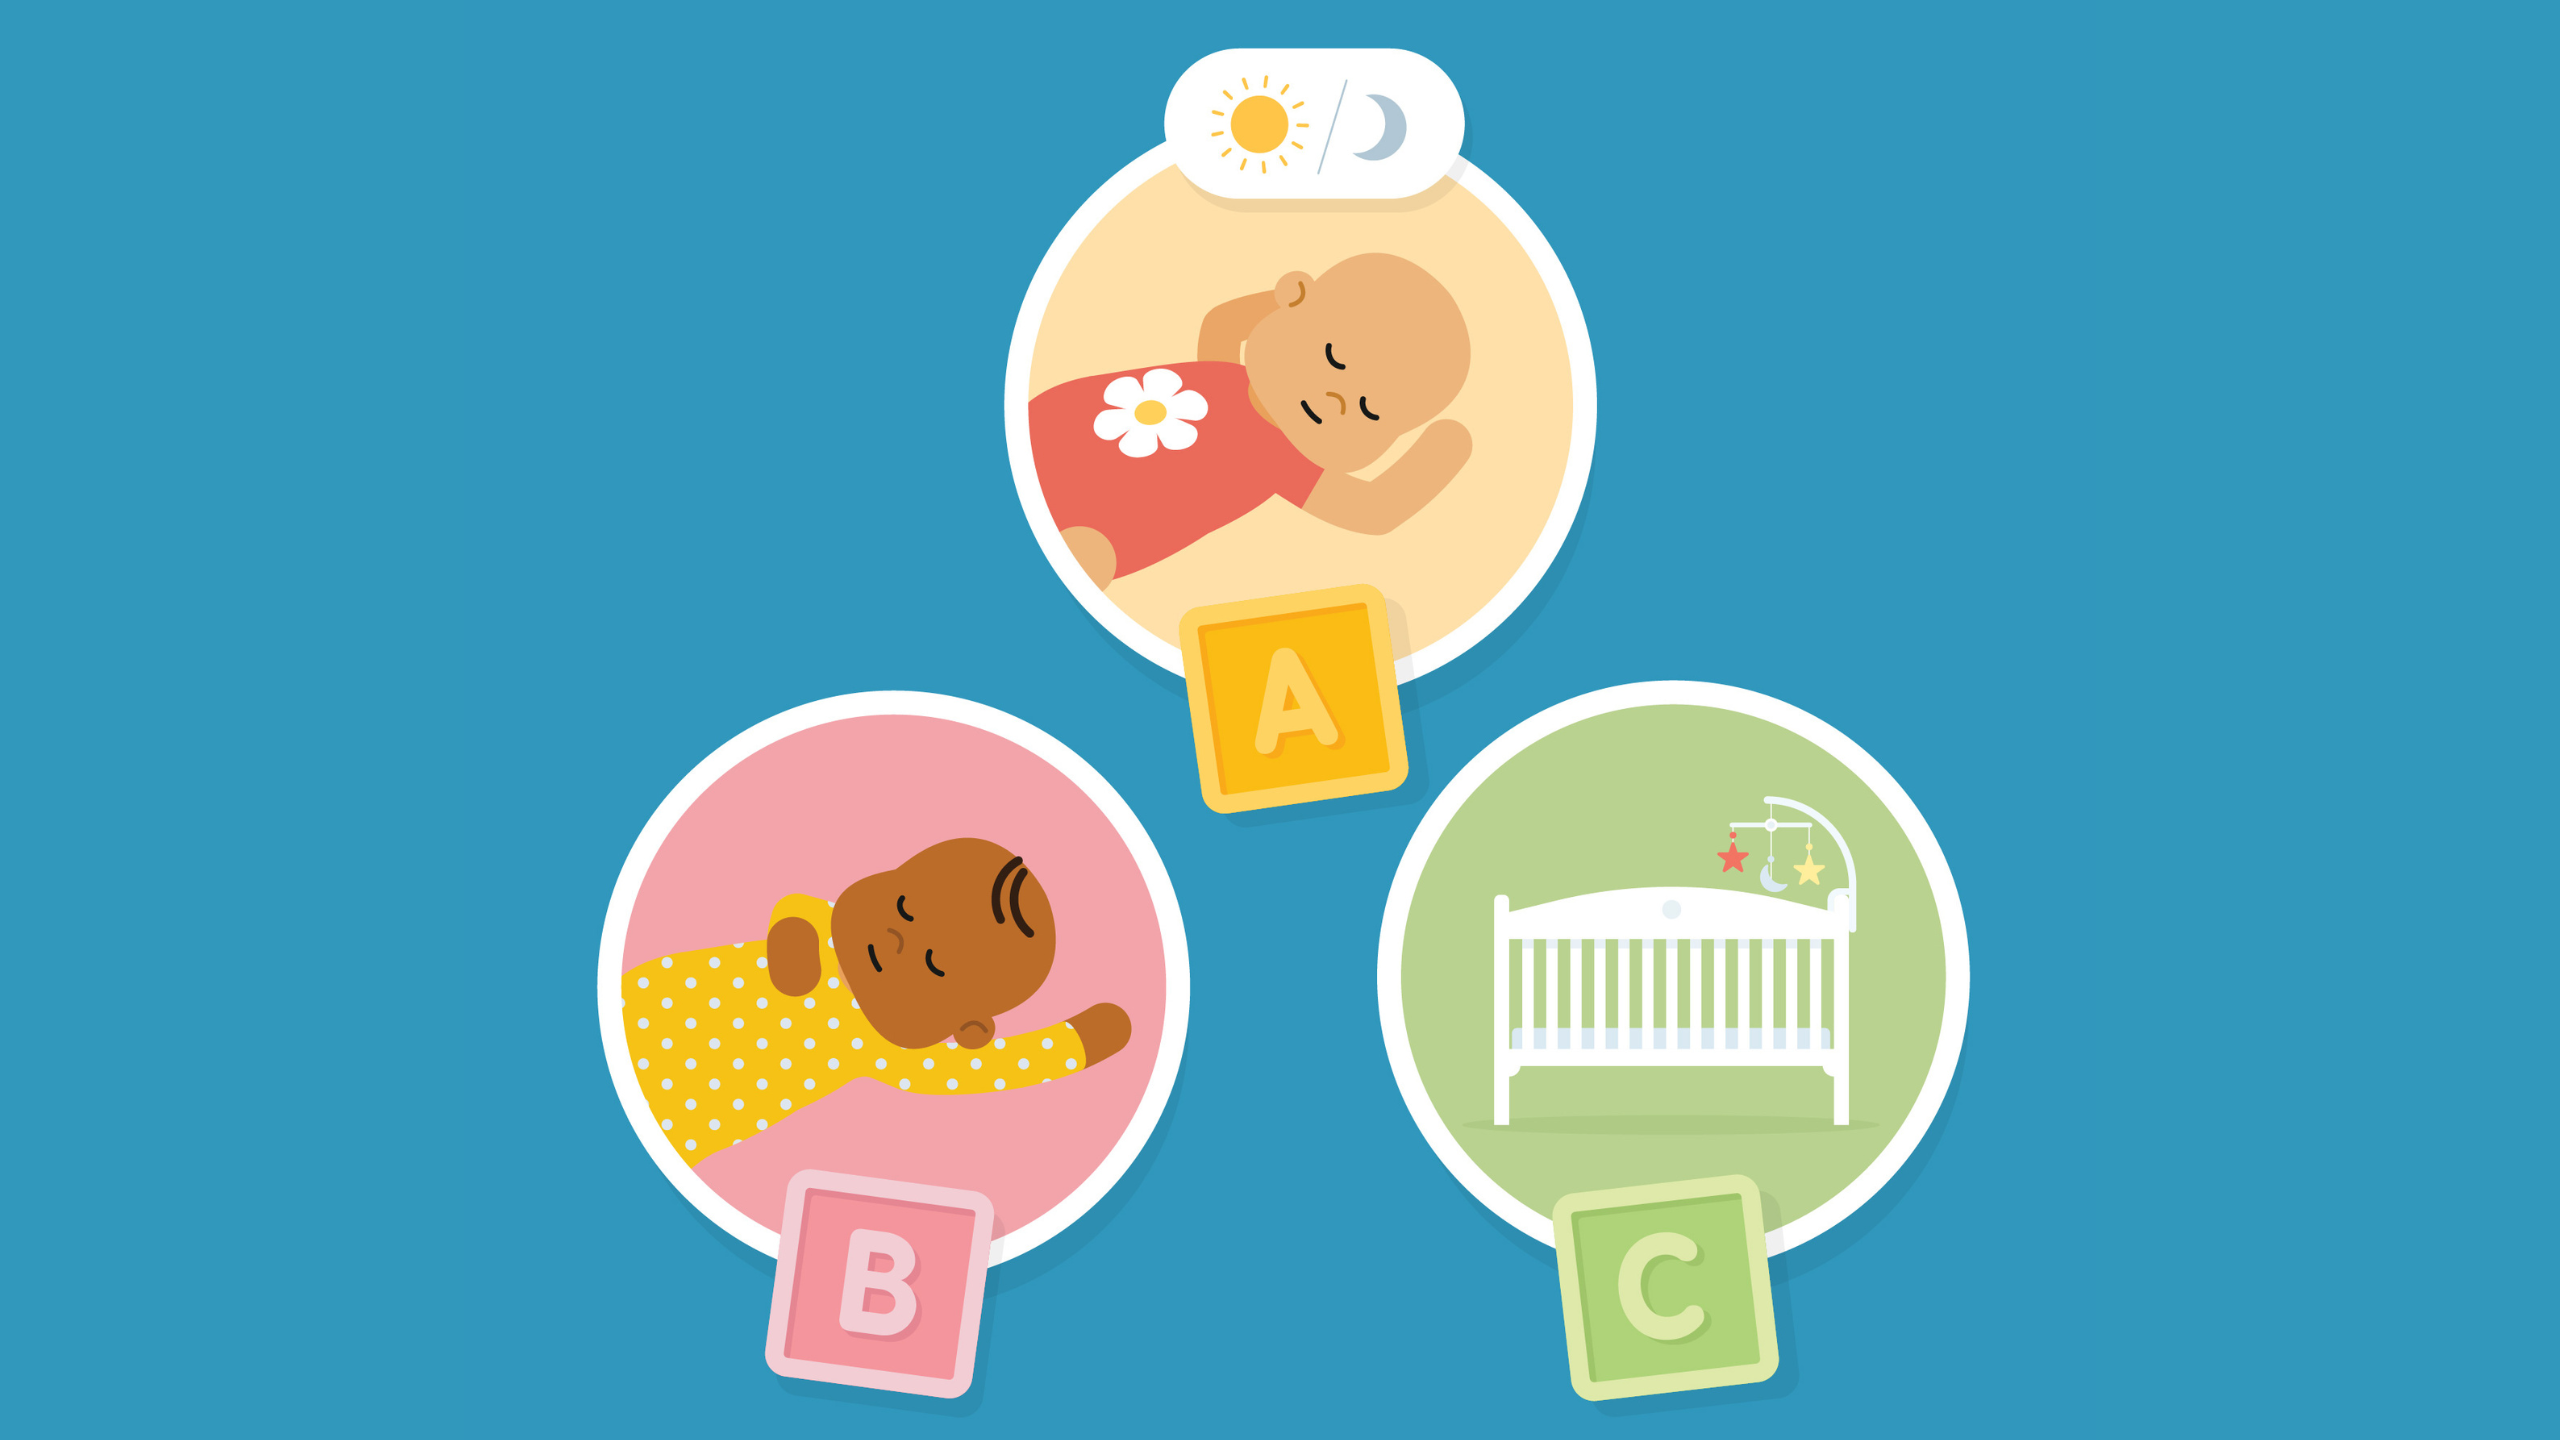 ABC - always sleep your baby on their back in a clear cot or sleep space - text free landscape